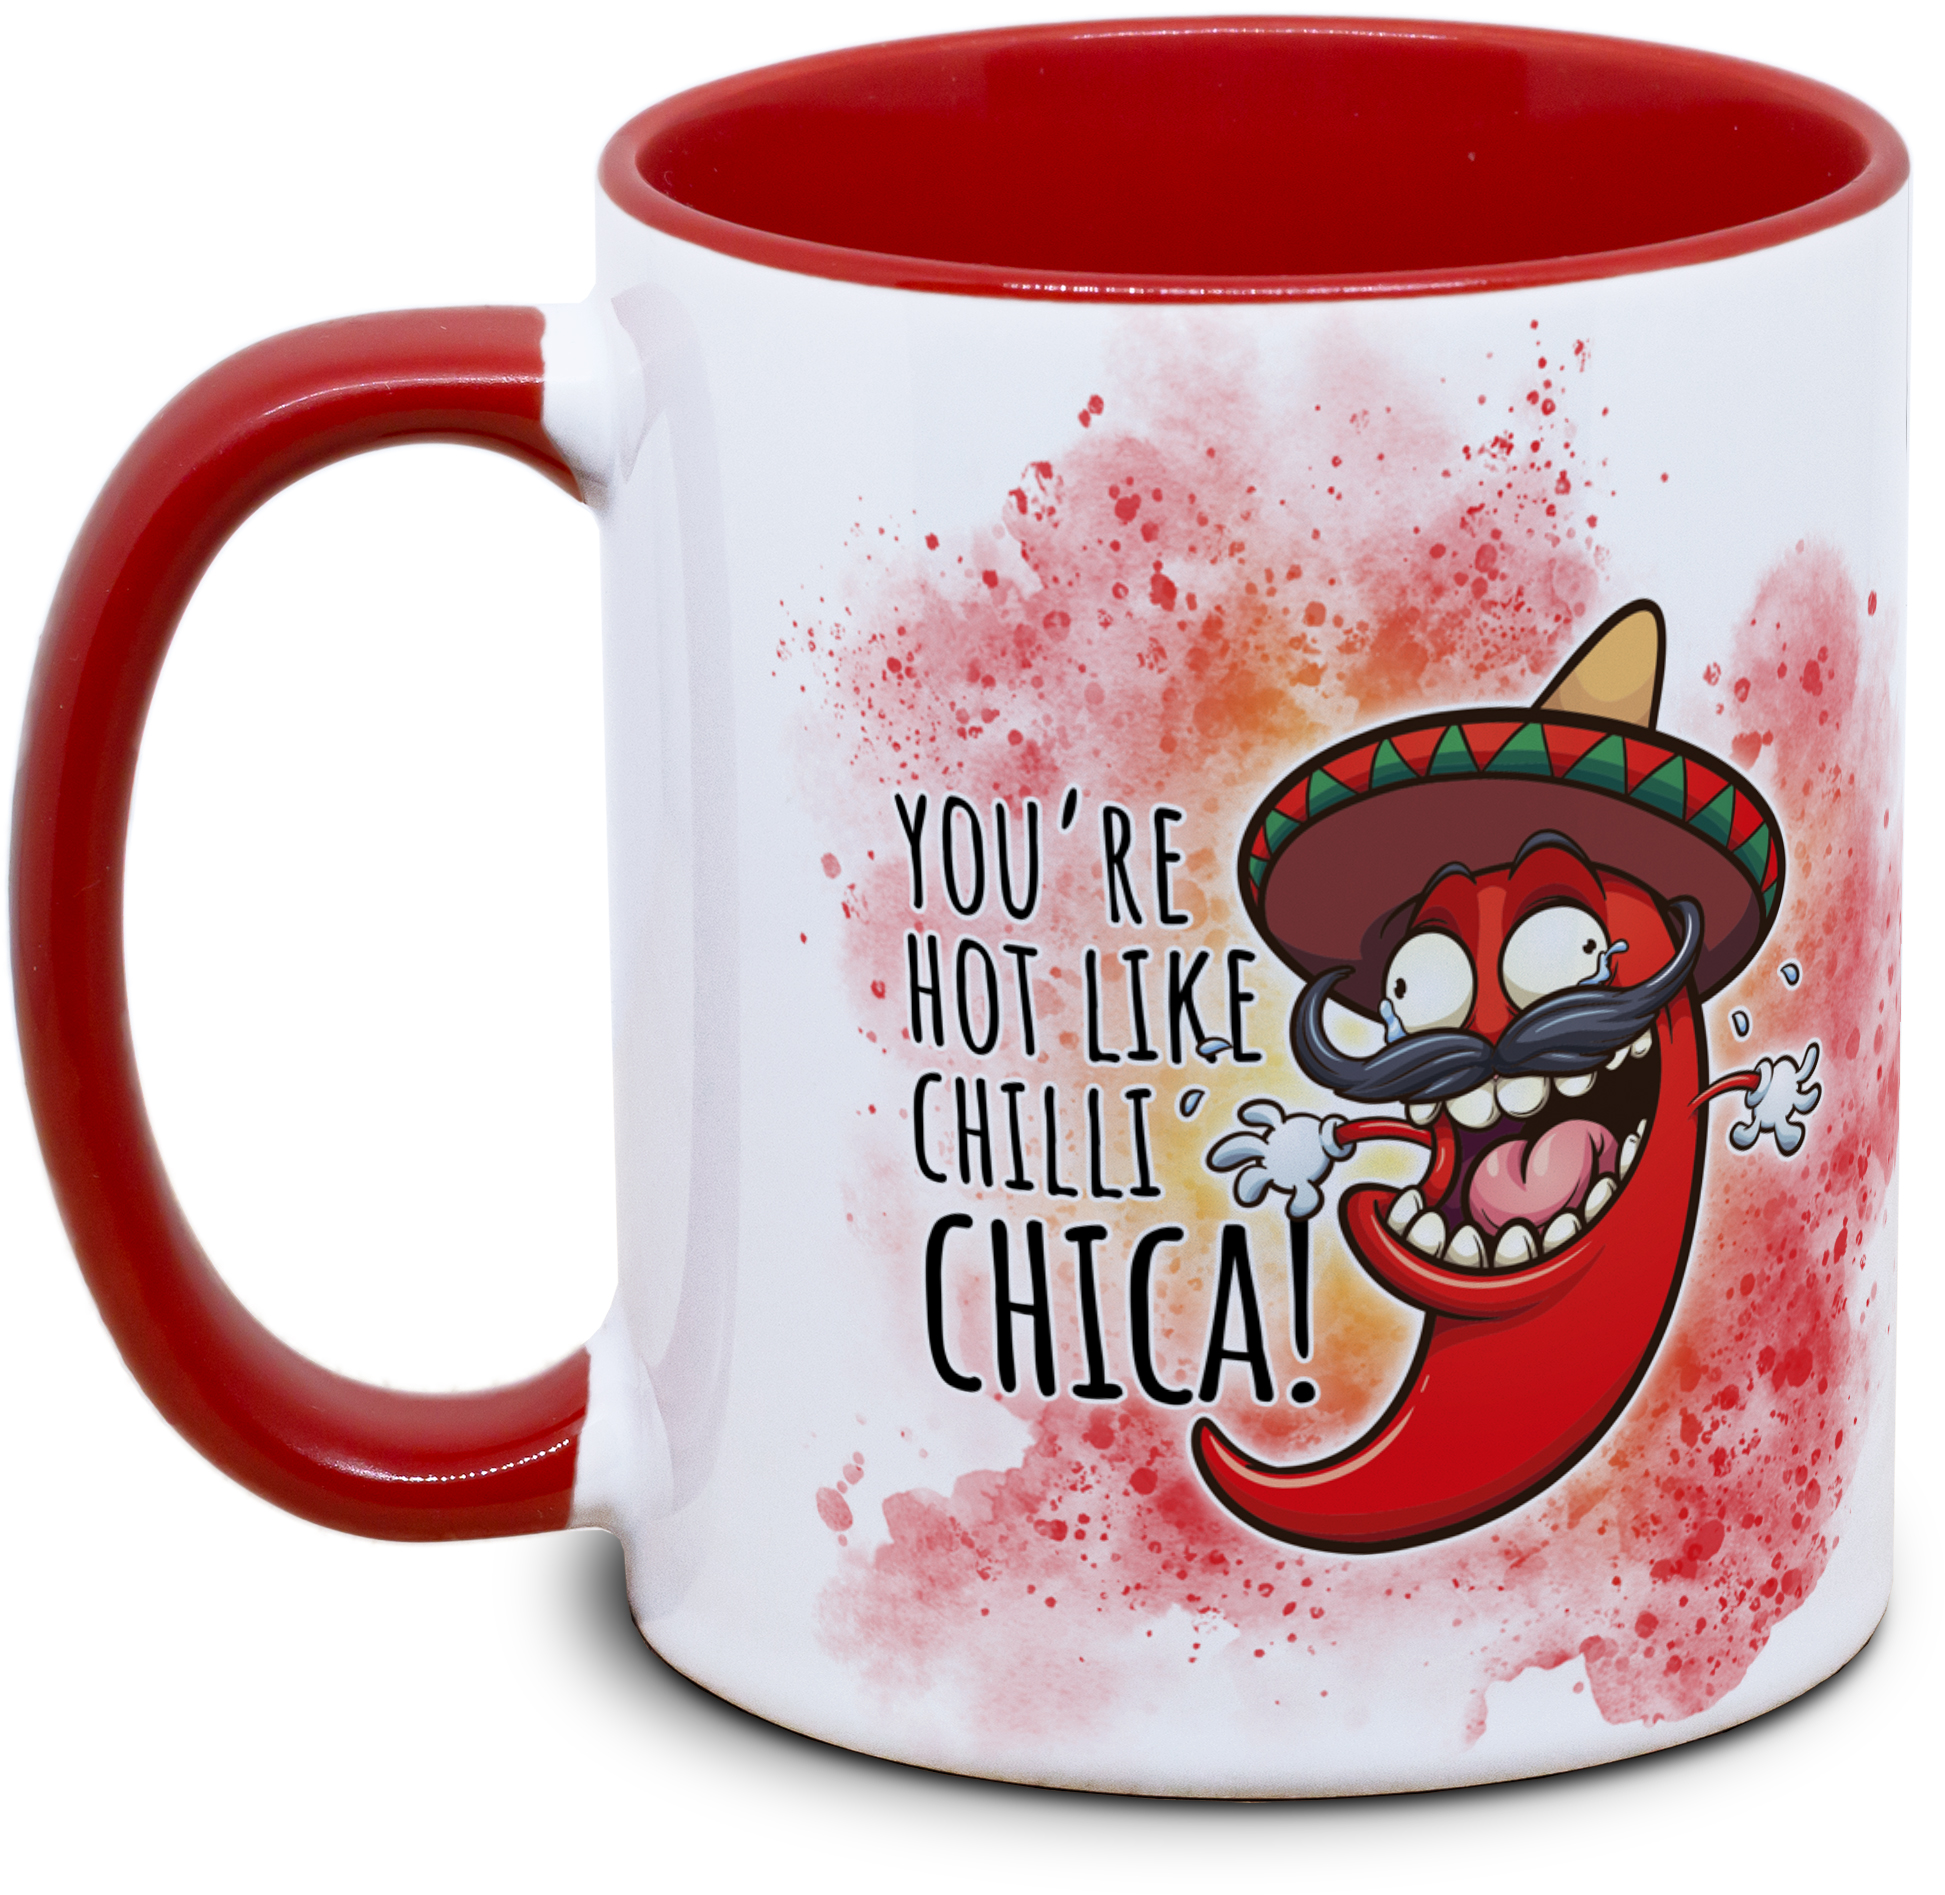 Your hot like Chilli, Chica!